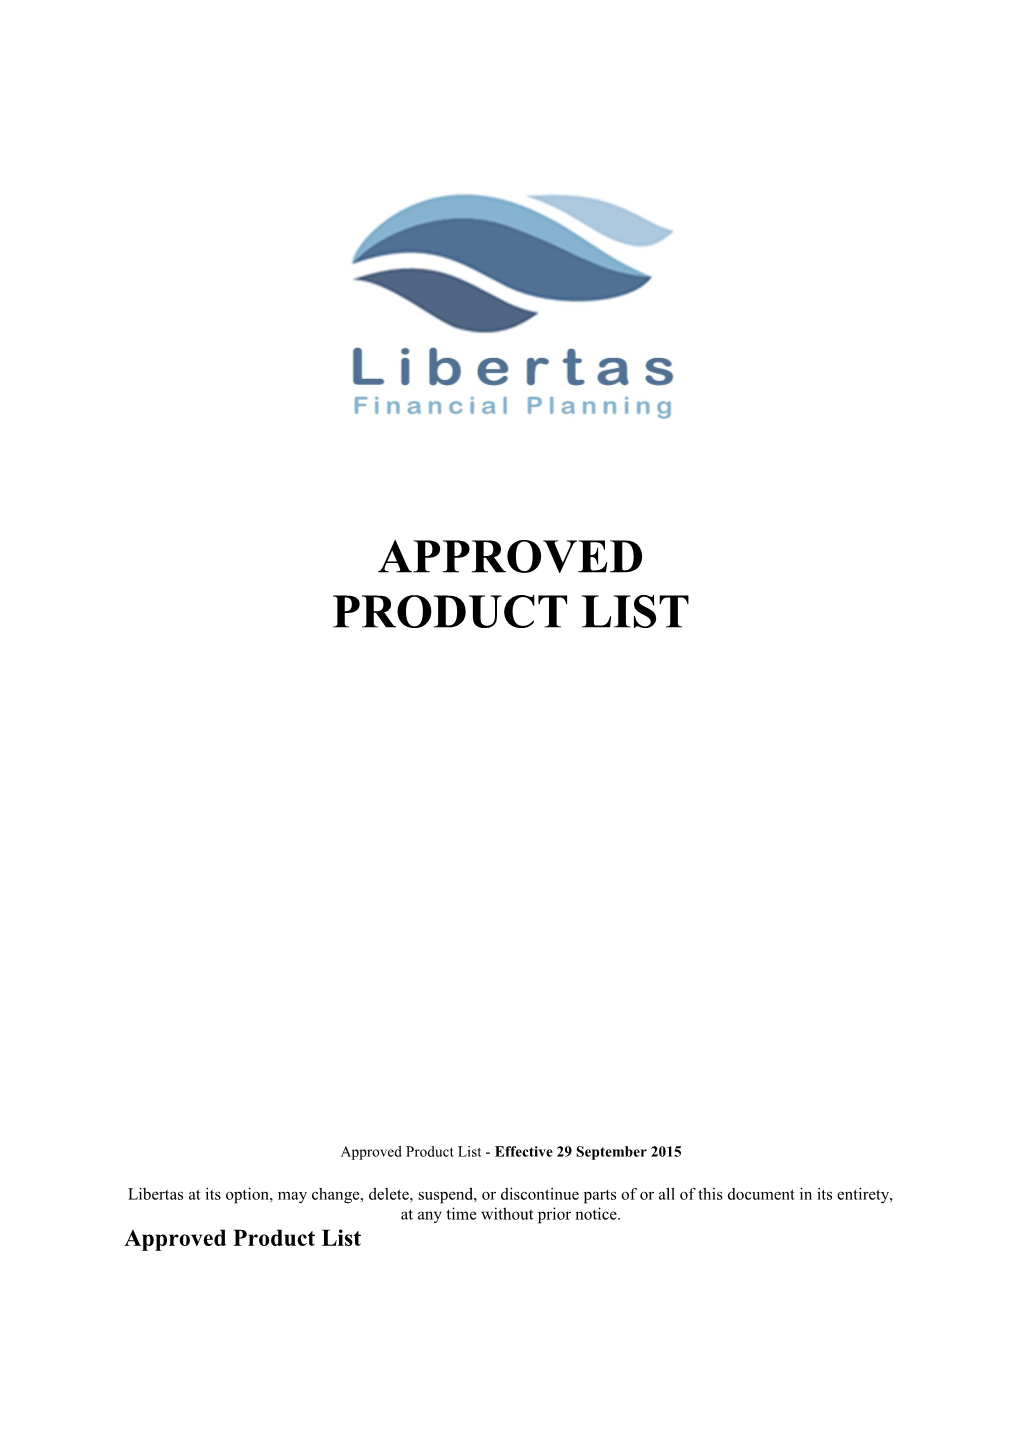 Approved Product List - Effective 29 September 2015